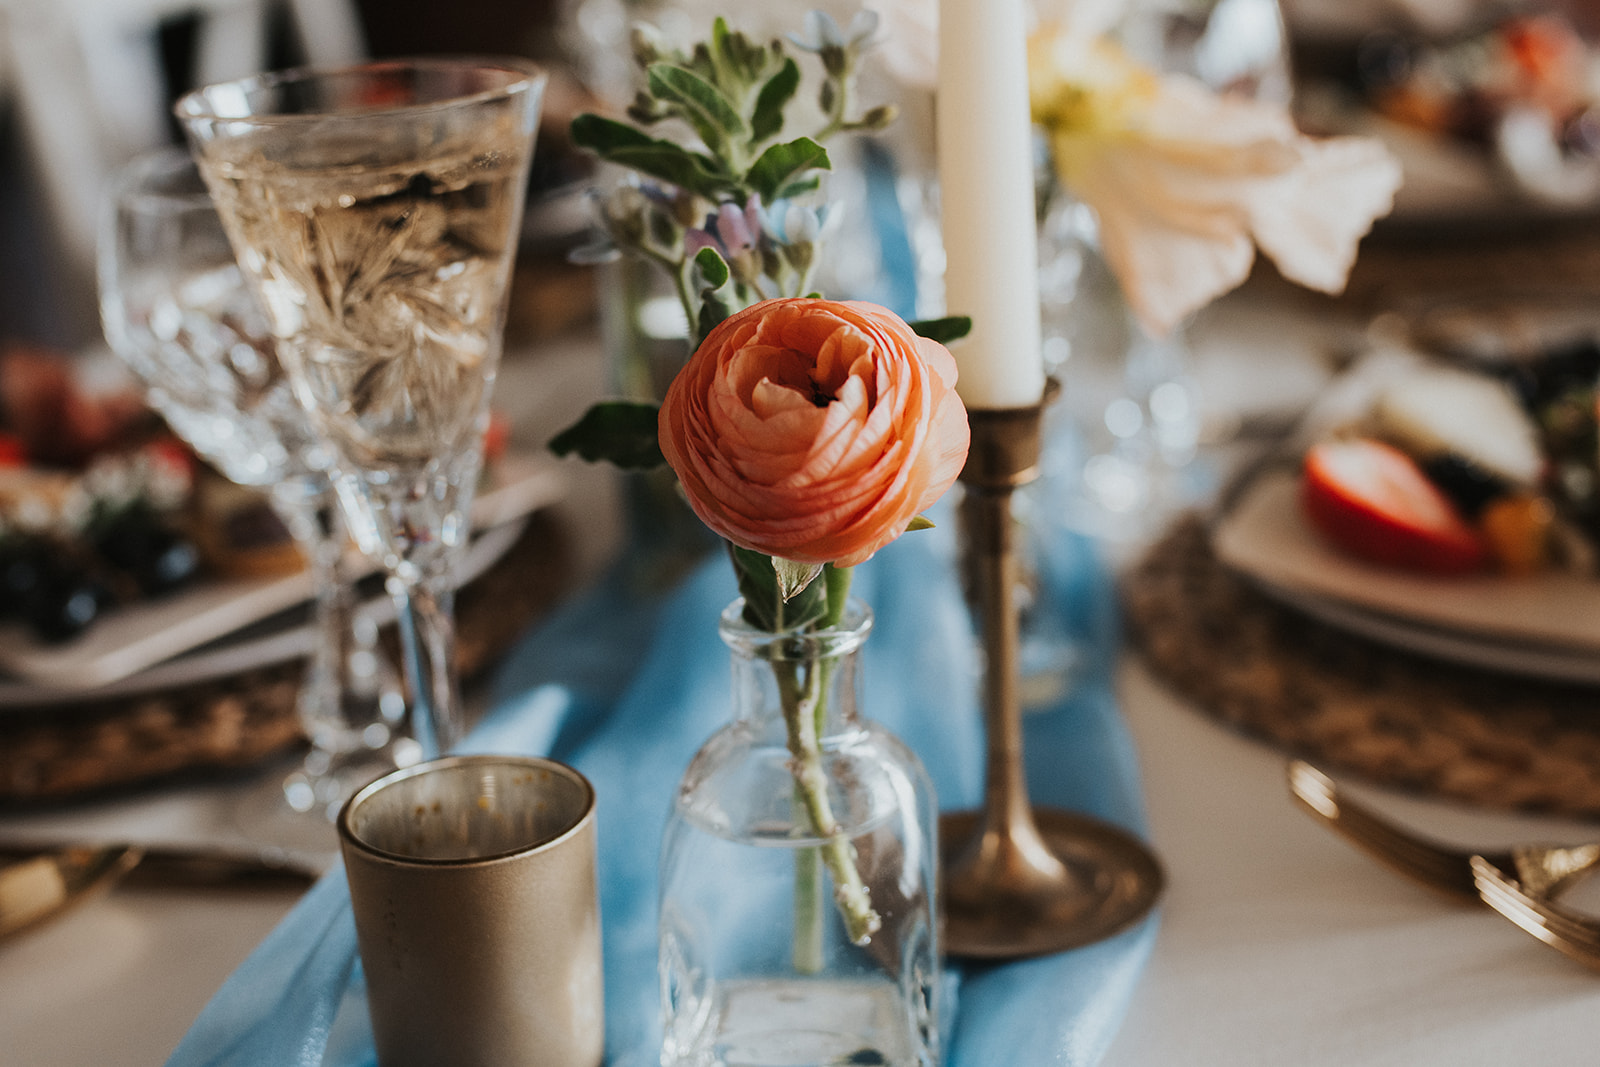 Primrose Styled Shoot – Tuesday, March 23 2021